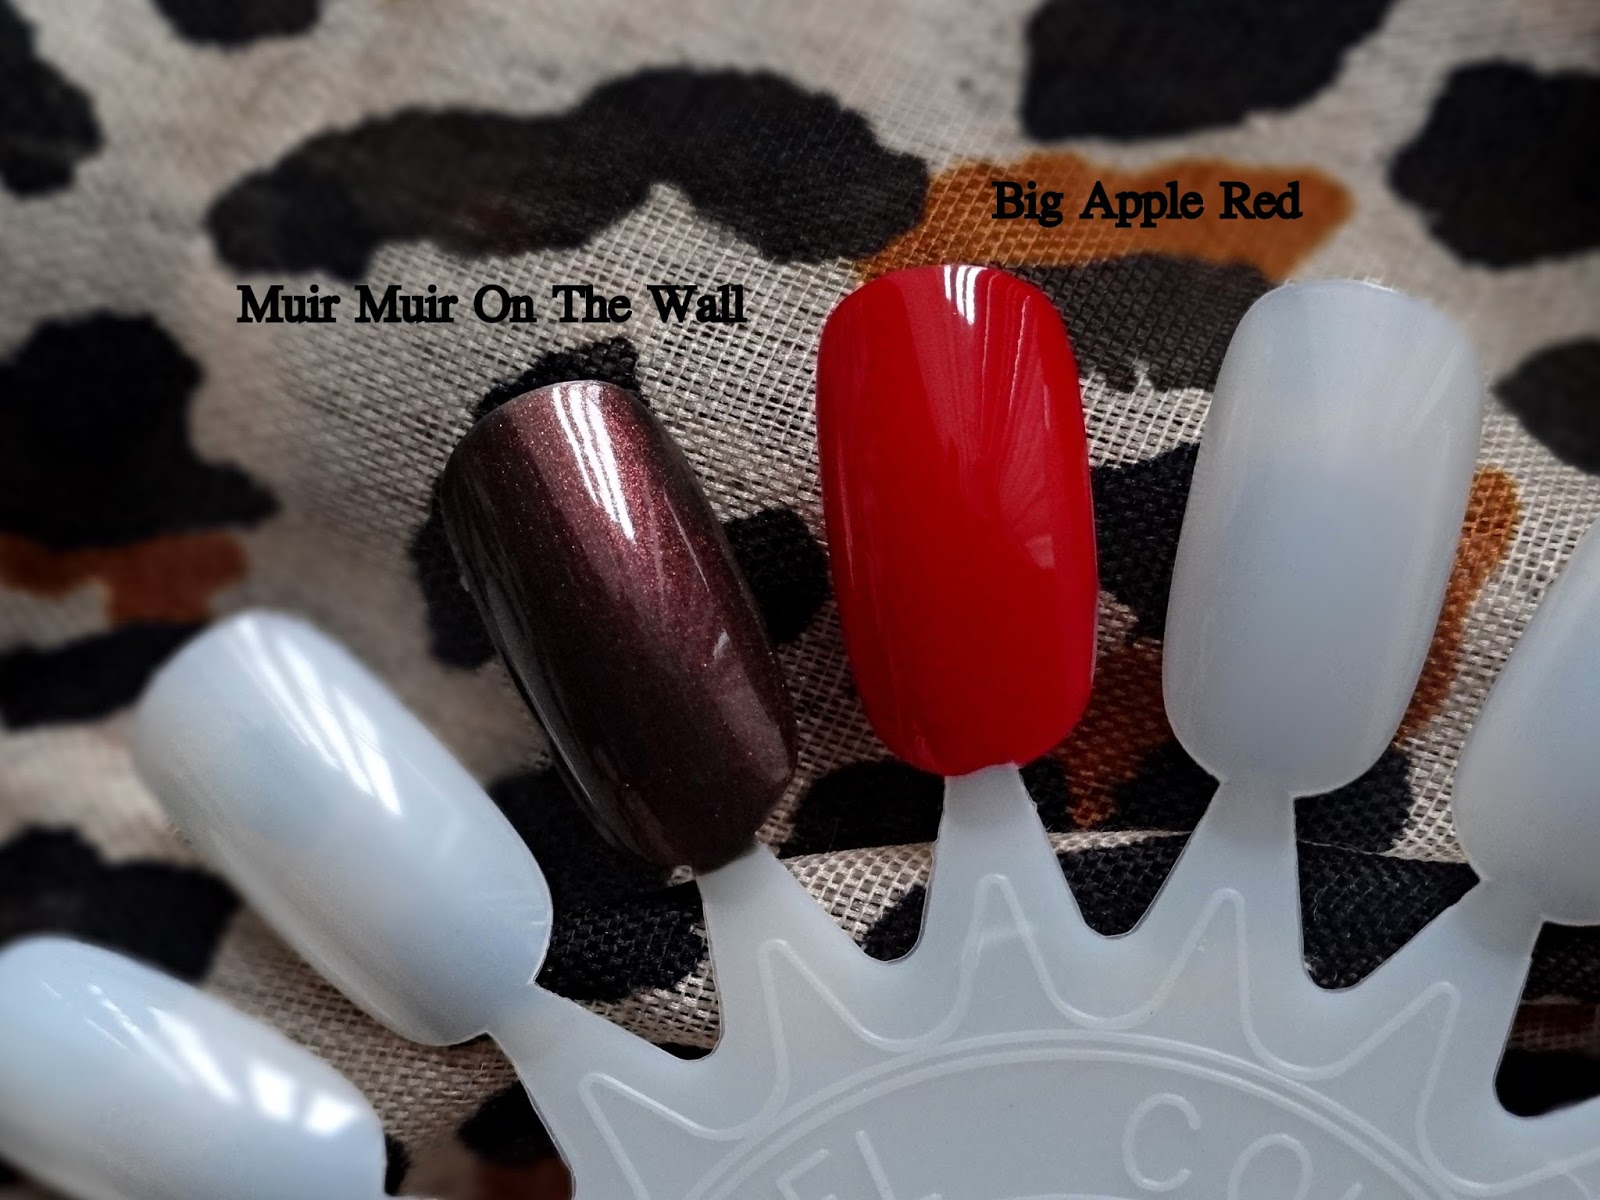 OPI Wrapped Wild For The Holidays - Muir Muir On The Wall, Big Apple Red | OPI Holiday 2014 Limited Edition Swatches